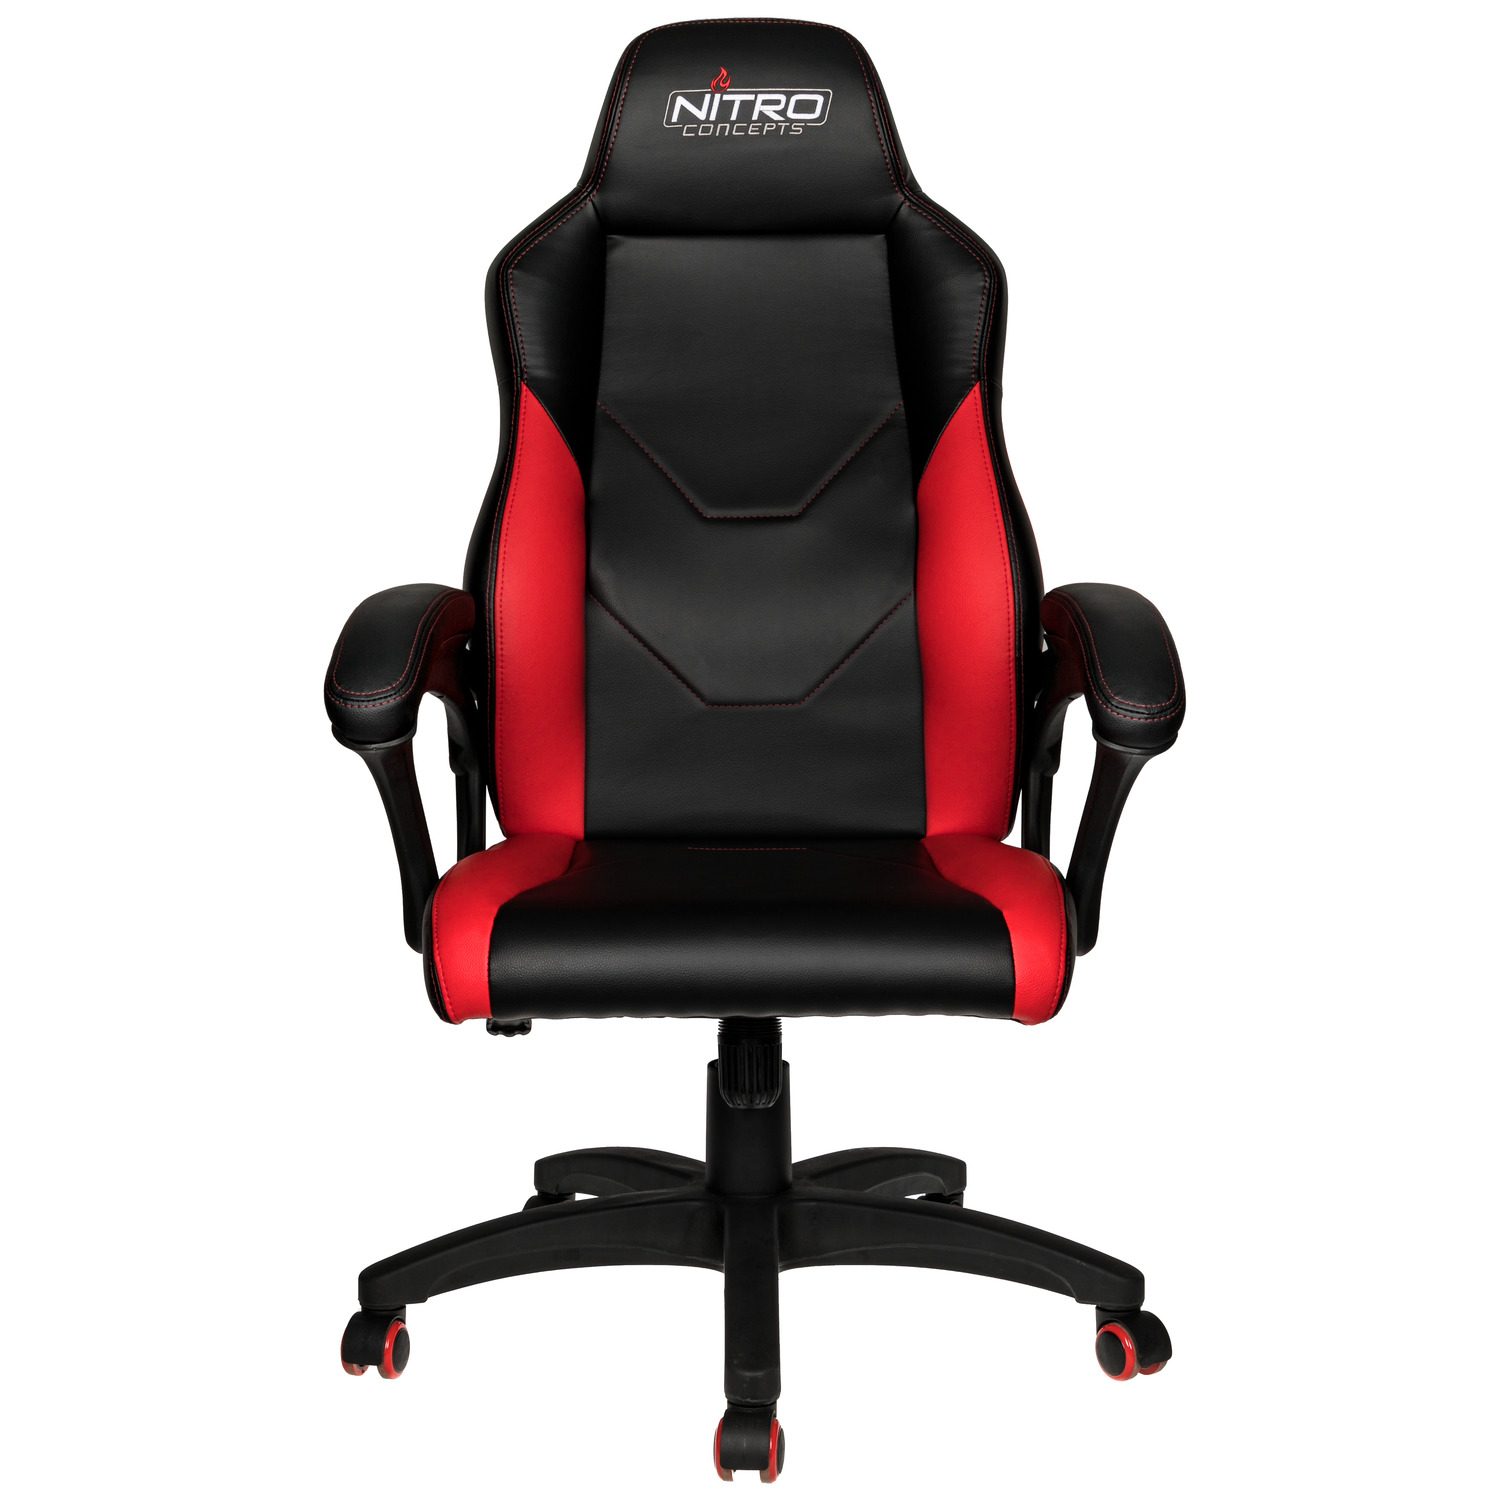 Nitro Concepts - C100 Gaming Chair - Black / Red